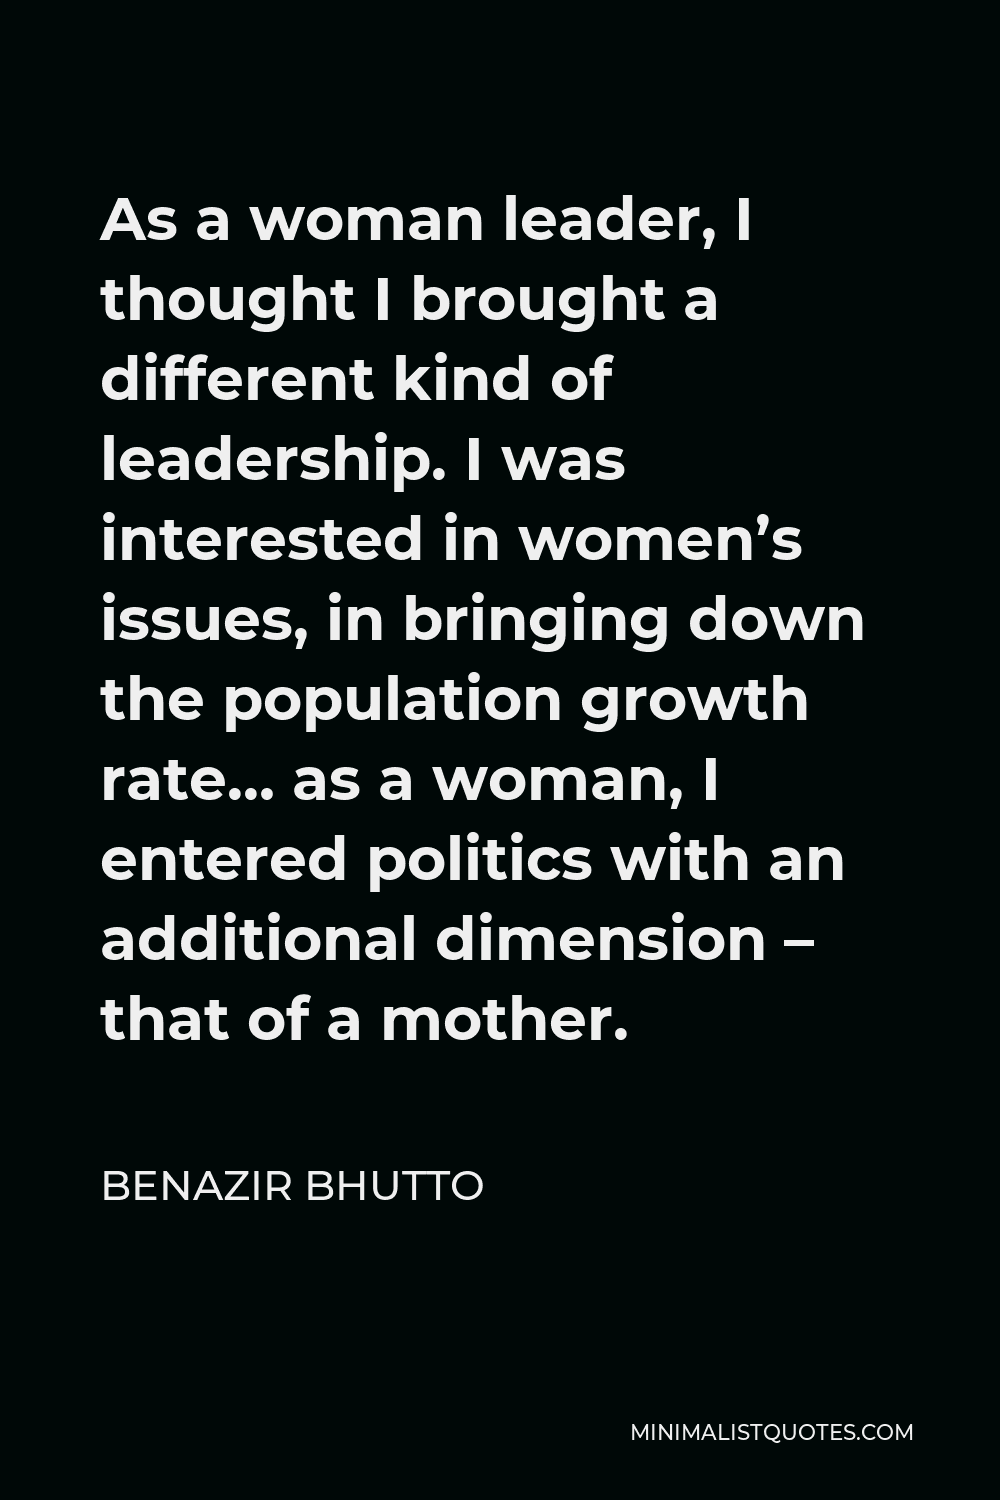 Benazir Bhutto Quote - As a woman leader, I thought I brought a different kind of leadership. I was interested in women’s issues, in bringing down the population growth rate… as a woman, I entered politics with an additional dimension – that of a mother.